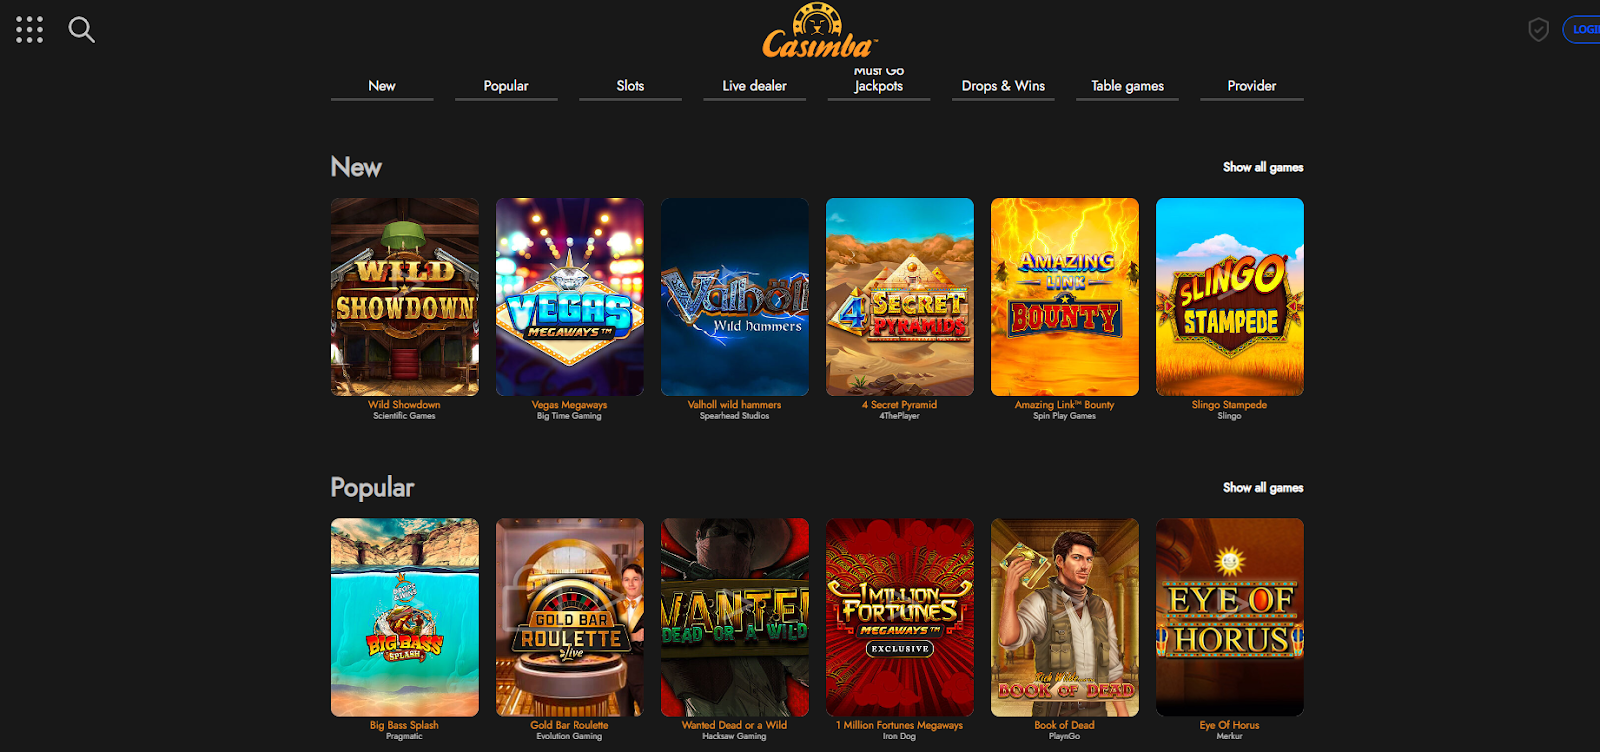 Casimba Casino has one of the best casino apps for Android users 